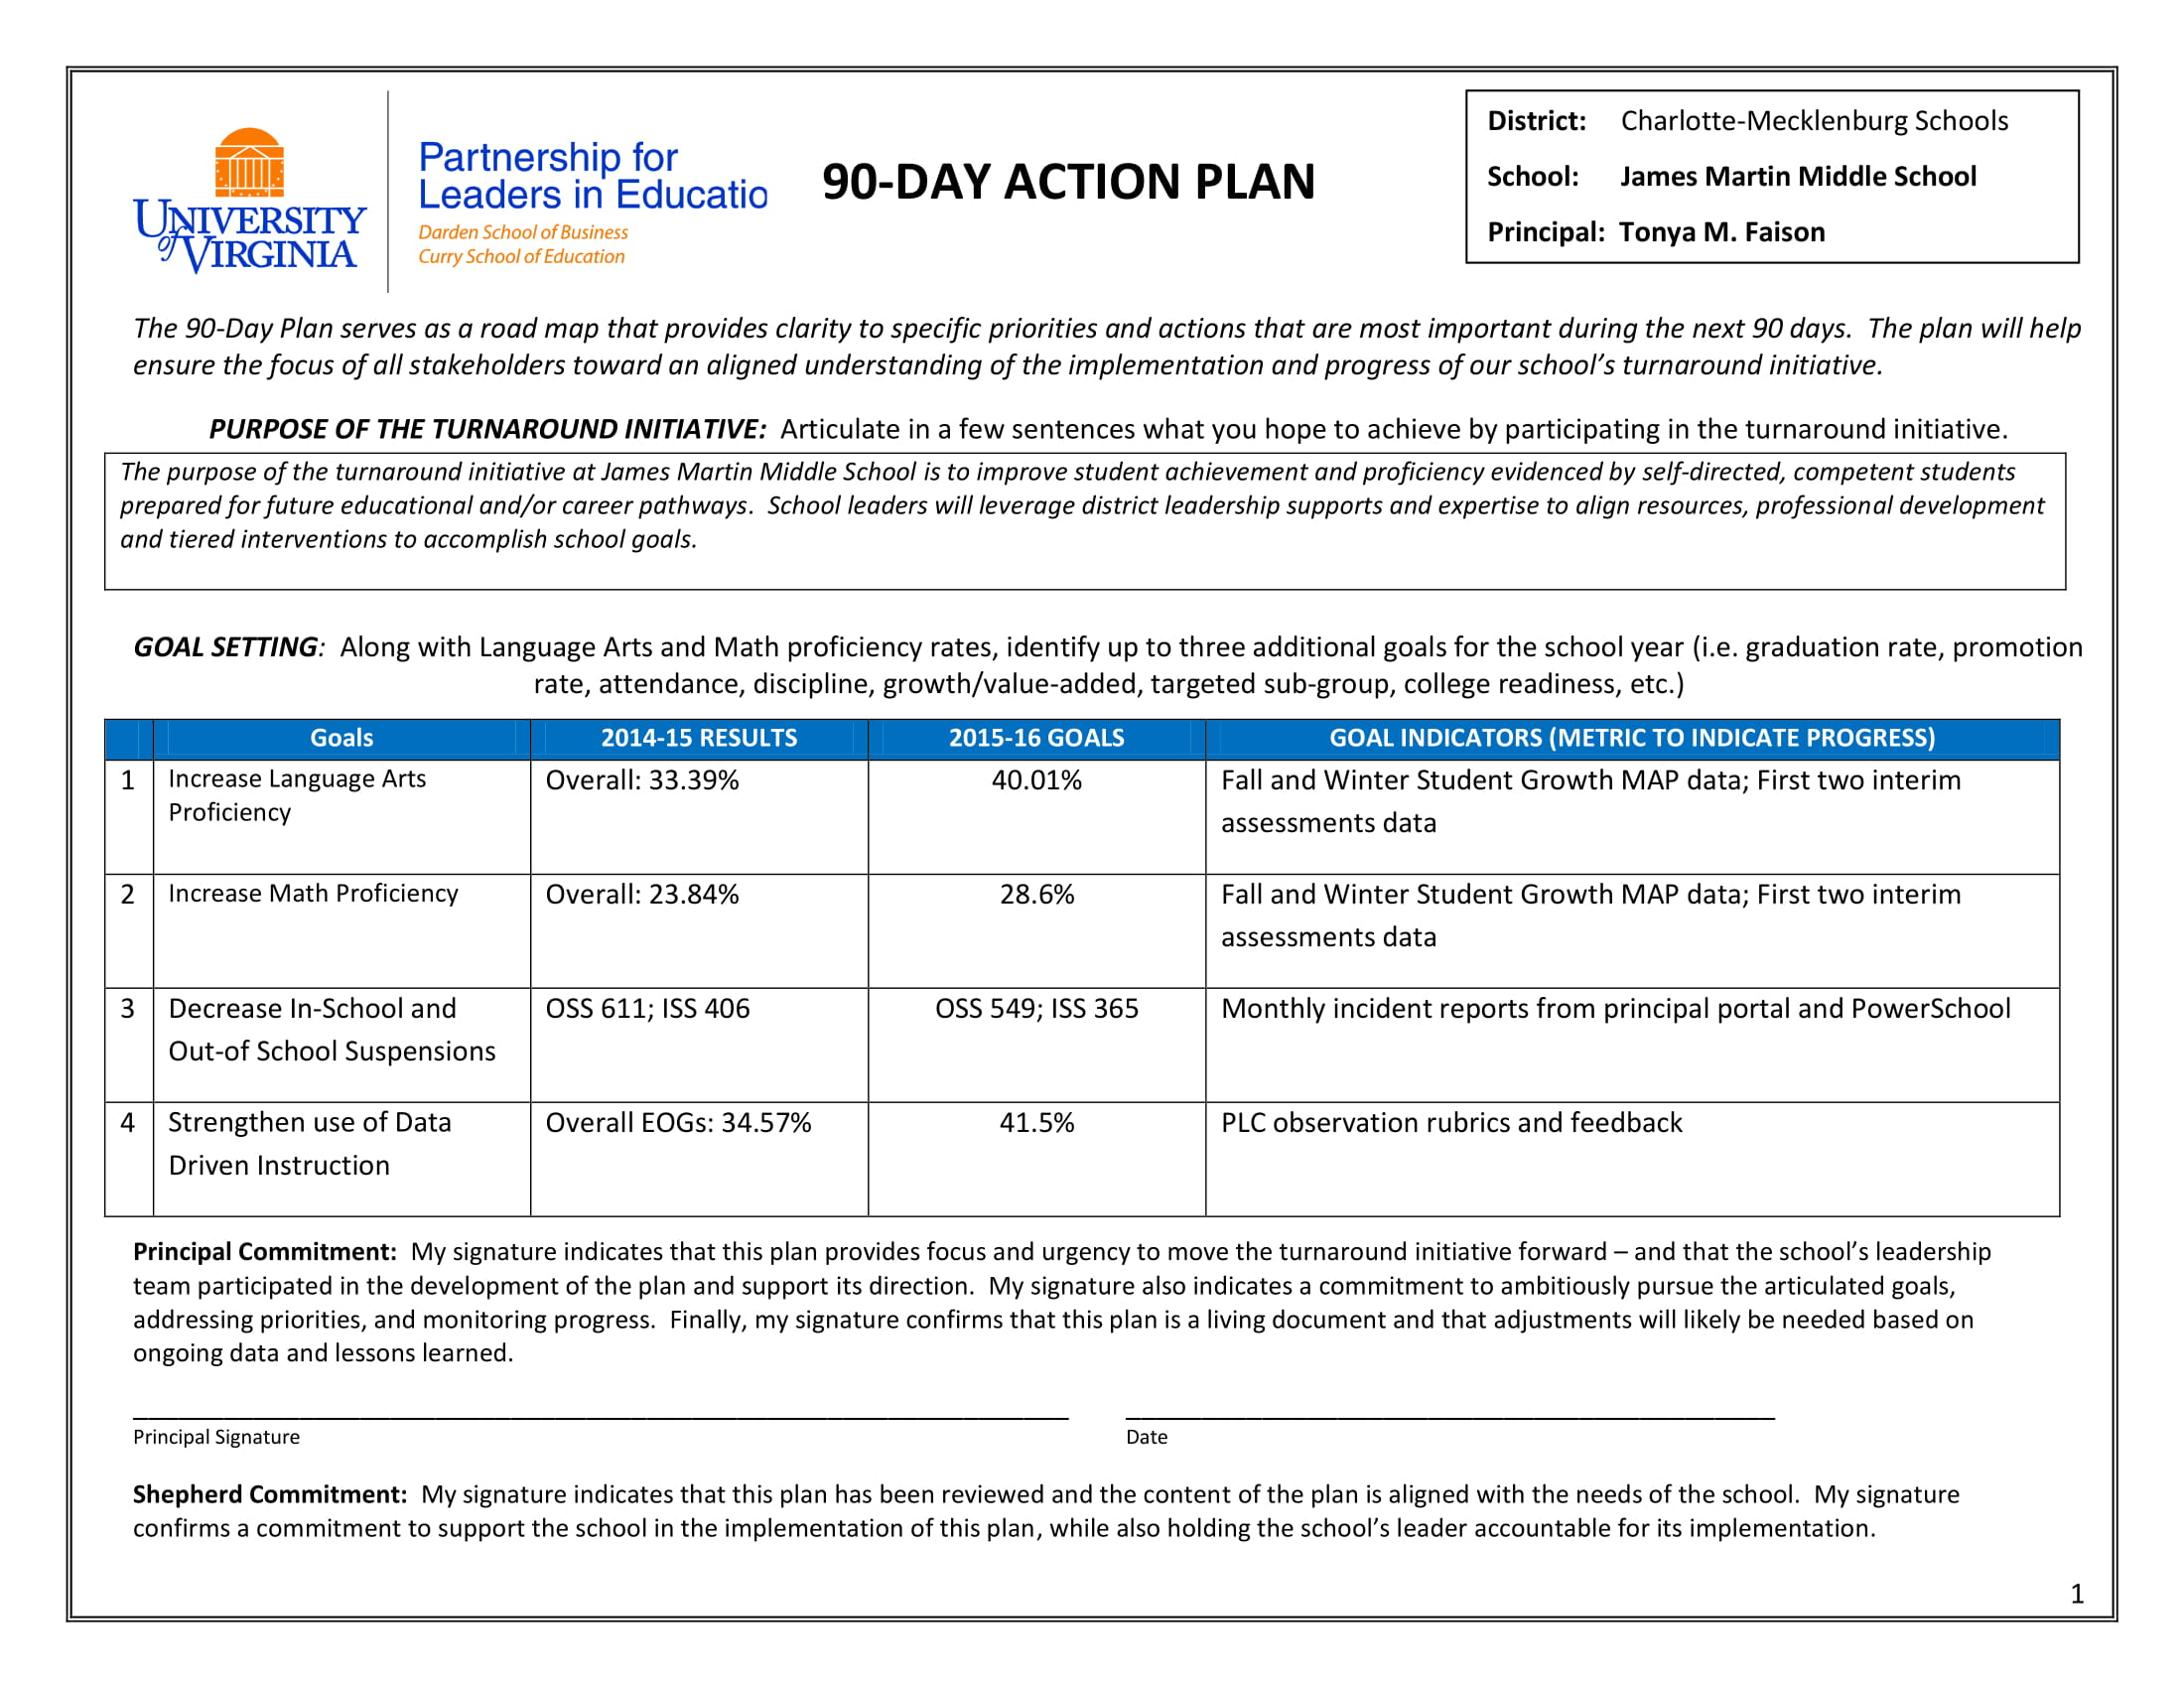 jmms 90 day action plan example